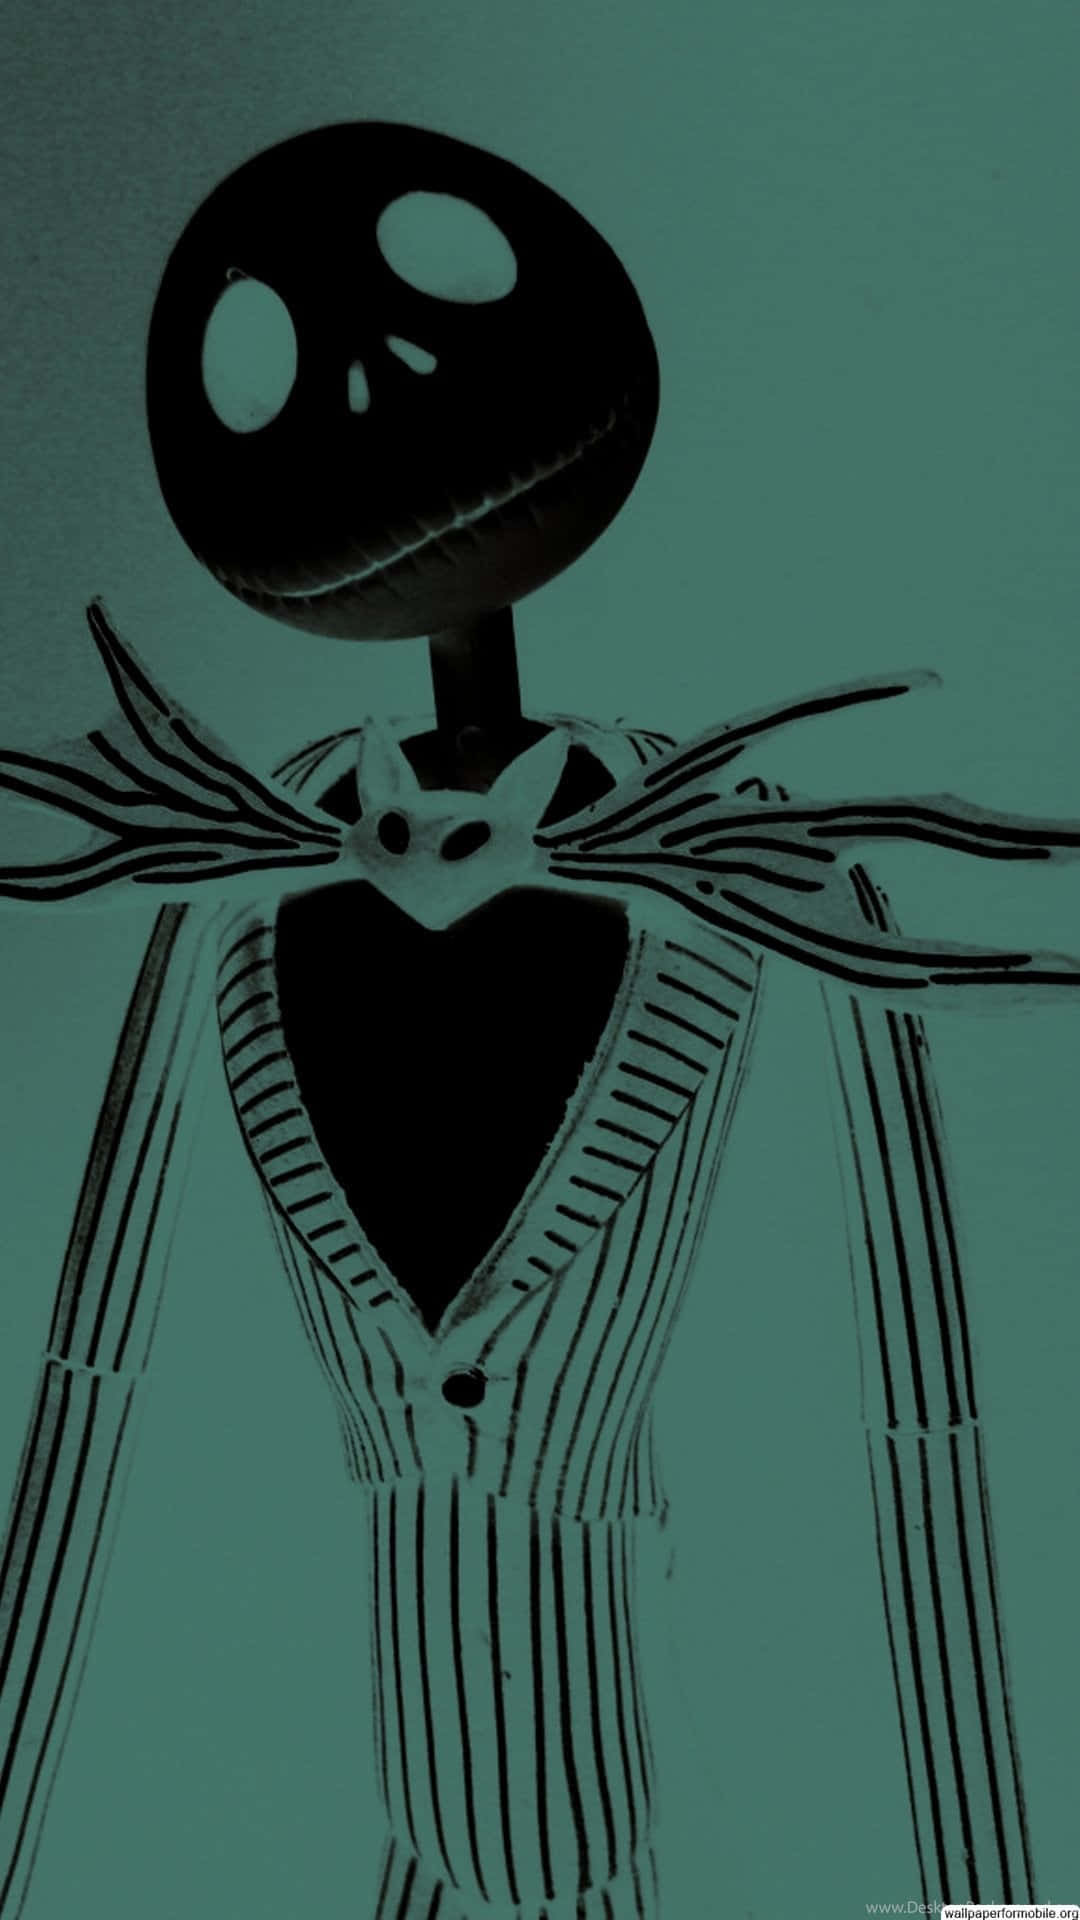 "Accessorize your phone in style with this iconic Nightmare Before Christmas design!" Wallpaper